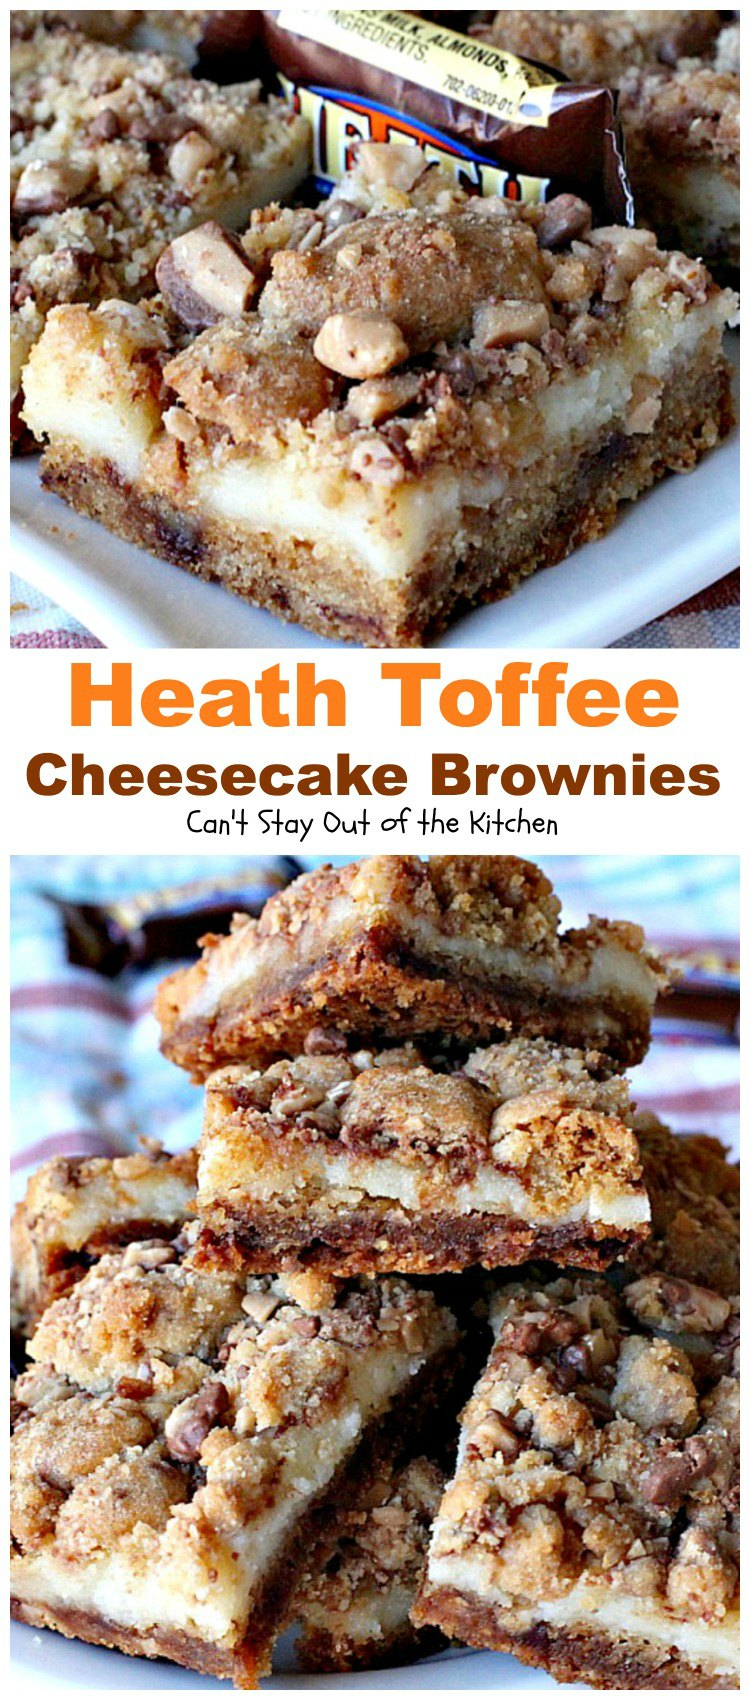 Heath Toffee Cheesecake Brownies | Can't Stay Out of the Kitchen